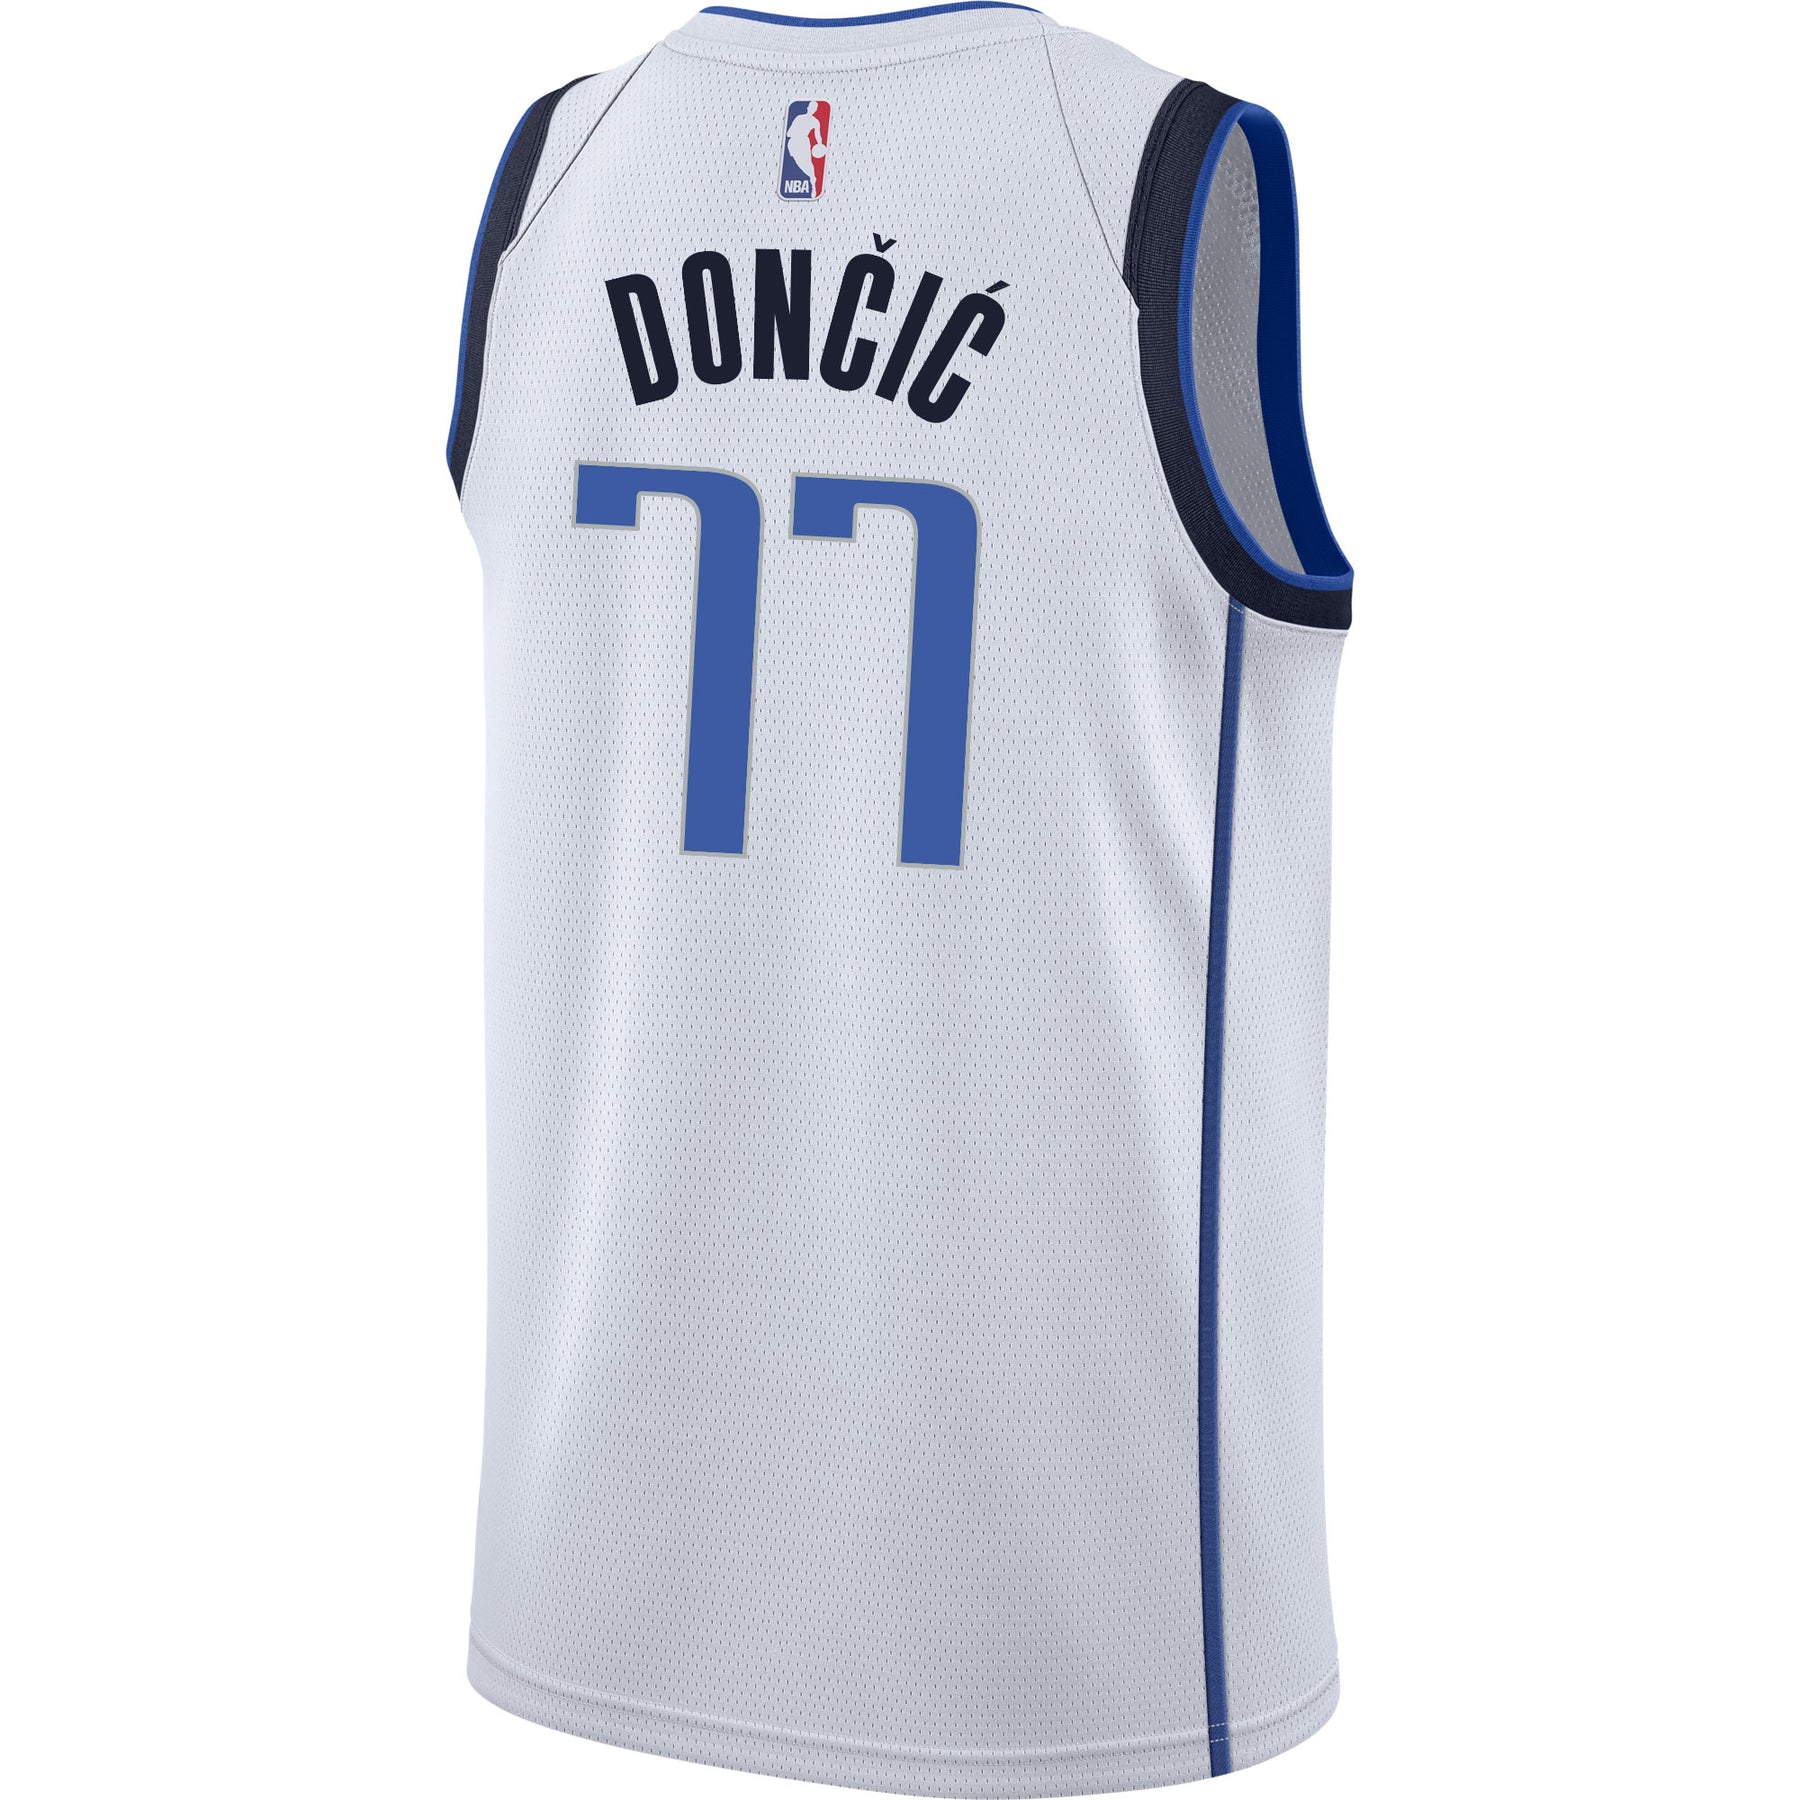 luka doncic jersey authentic  Nba pictures, Basketball